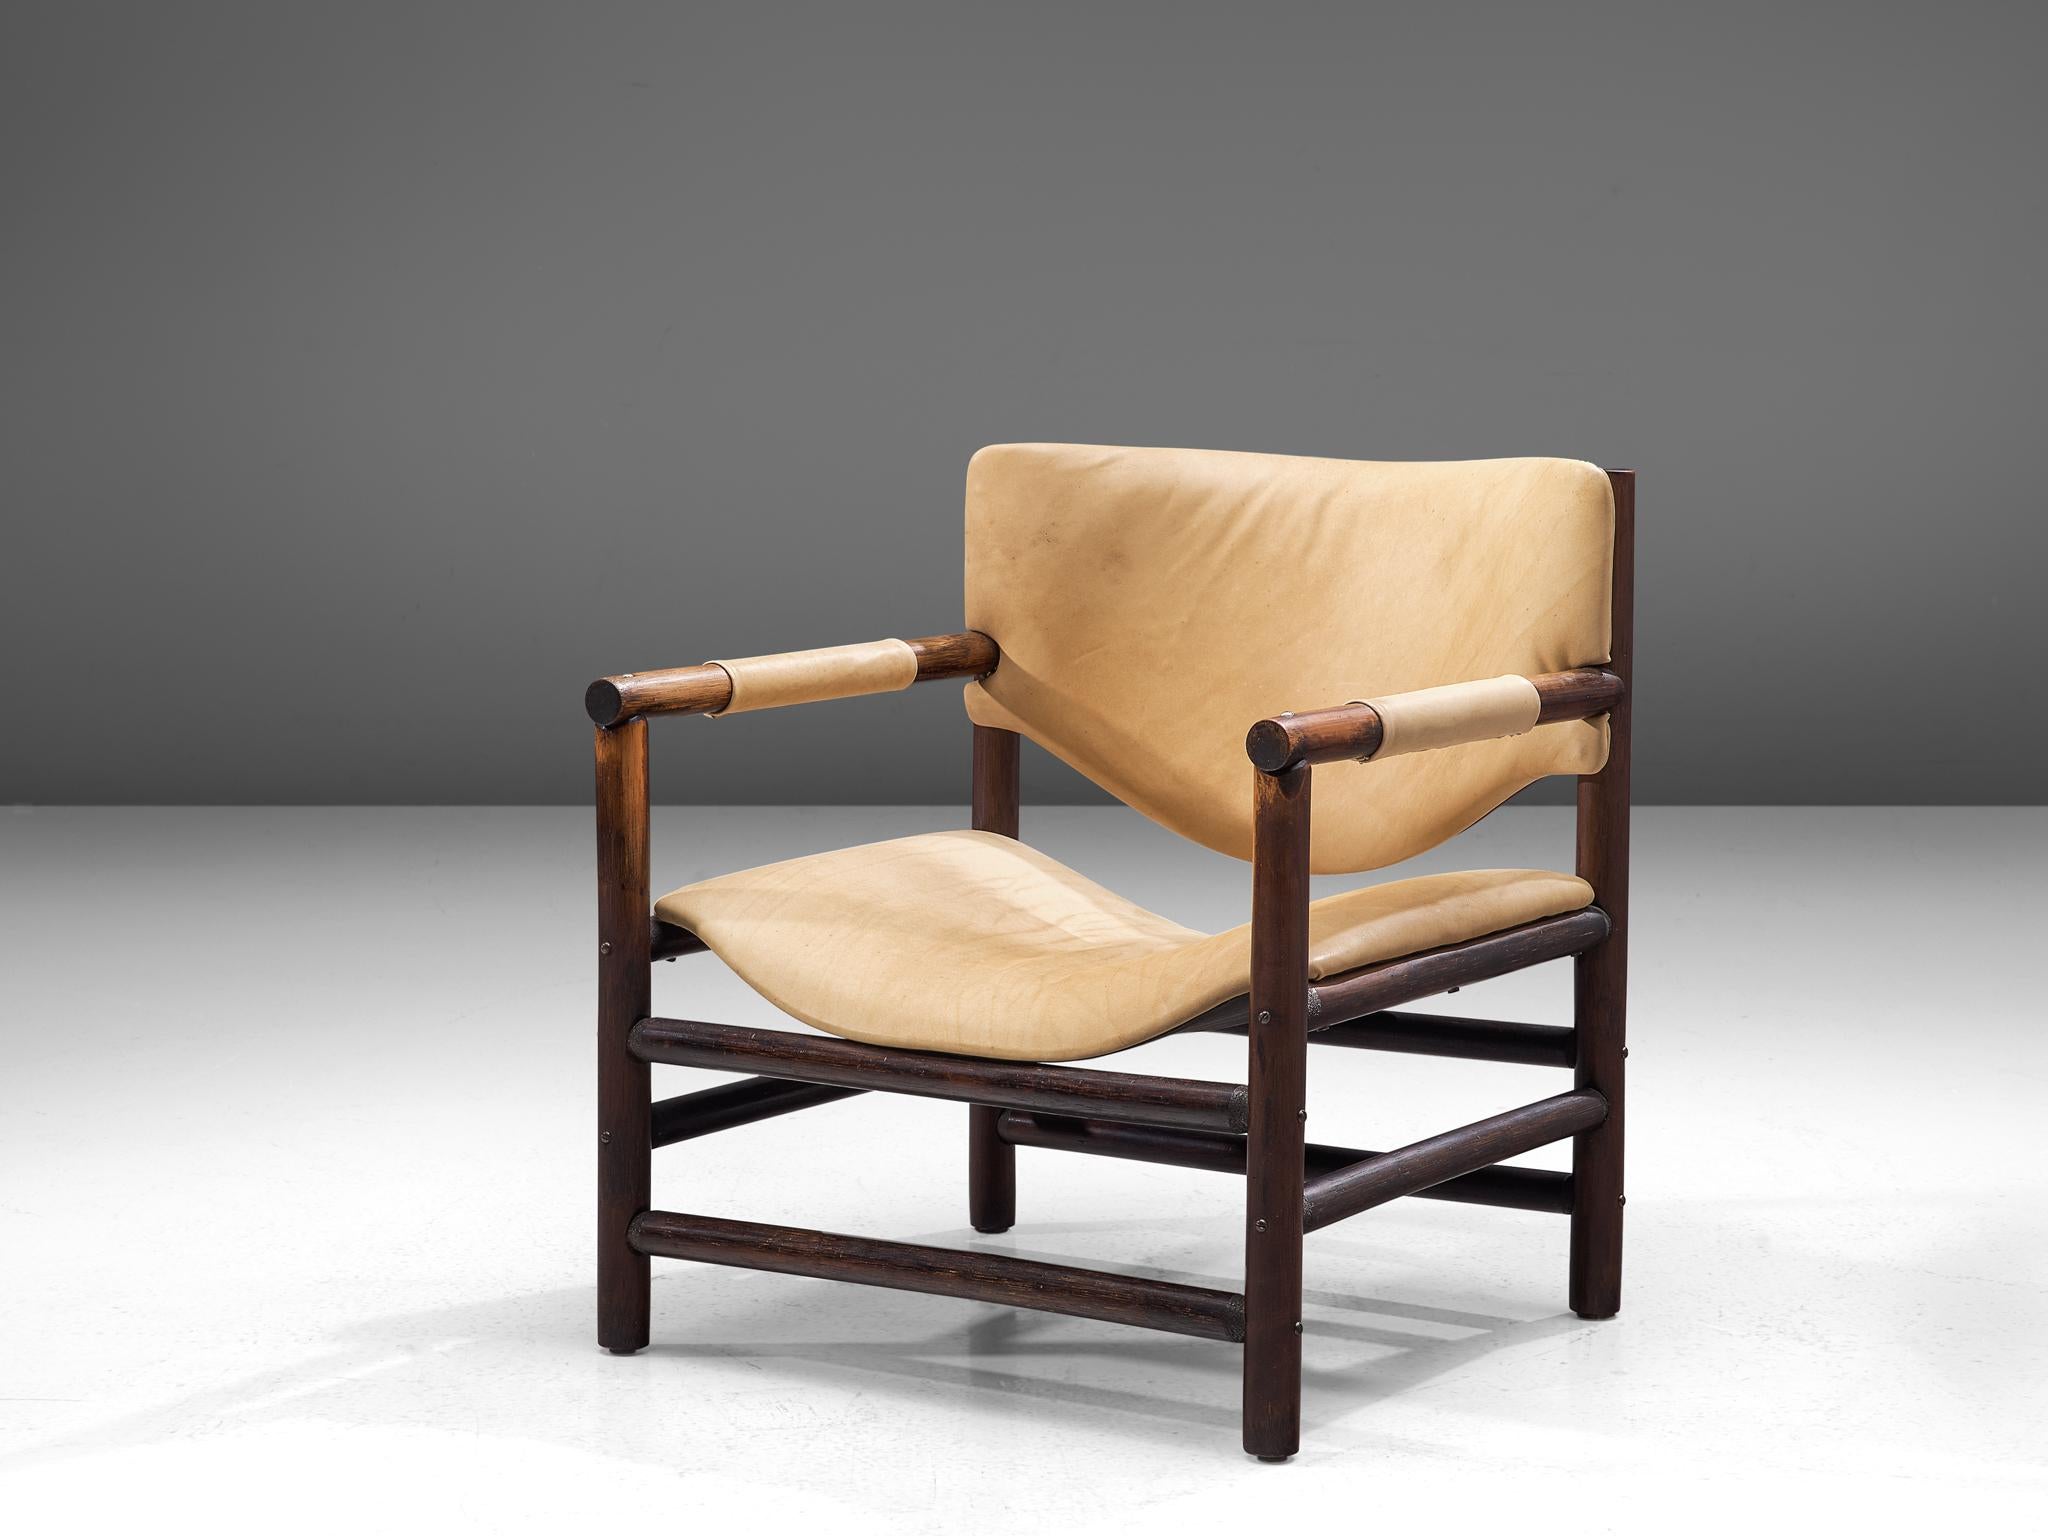 Easy chair, leather and oak, Scandinavia, 1960s

A wonderful rustic armchair with geometric wooden frame made from strong horizontal and vertical lines. The seat and backrest, upholstered in natural leather, are organically shaped, which is a